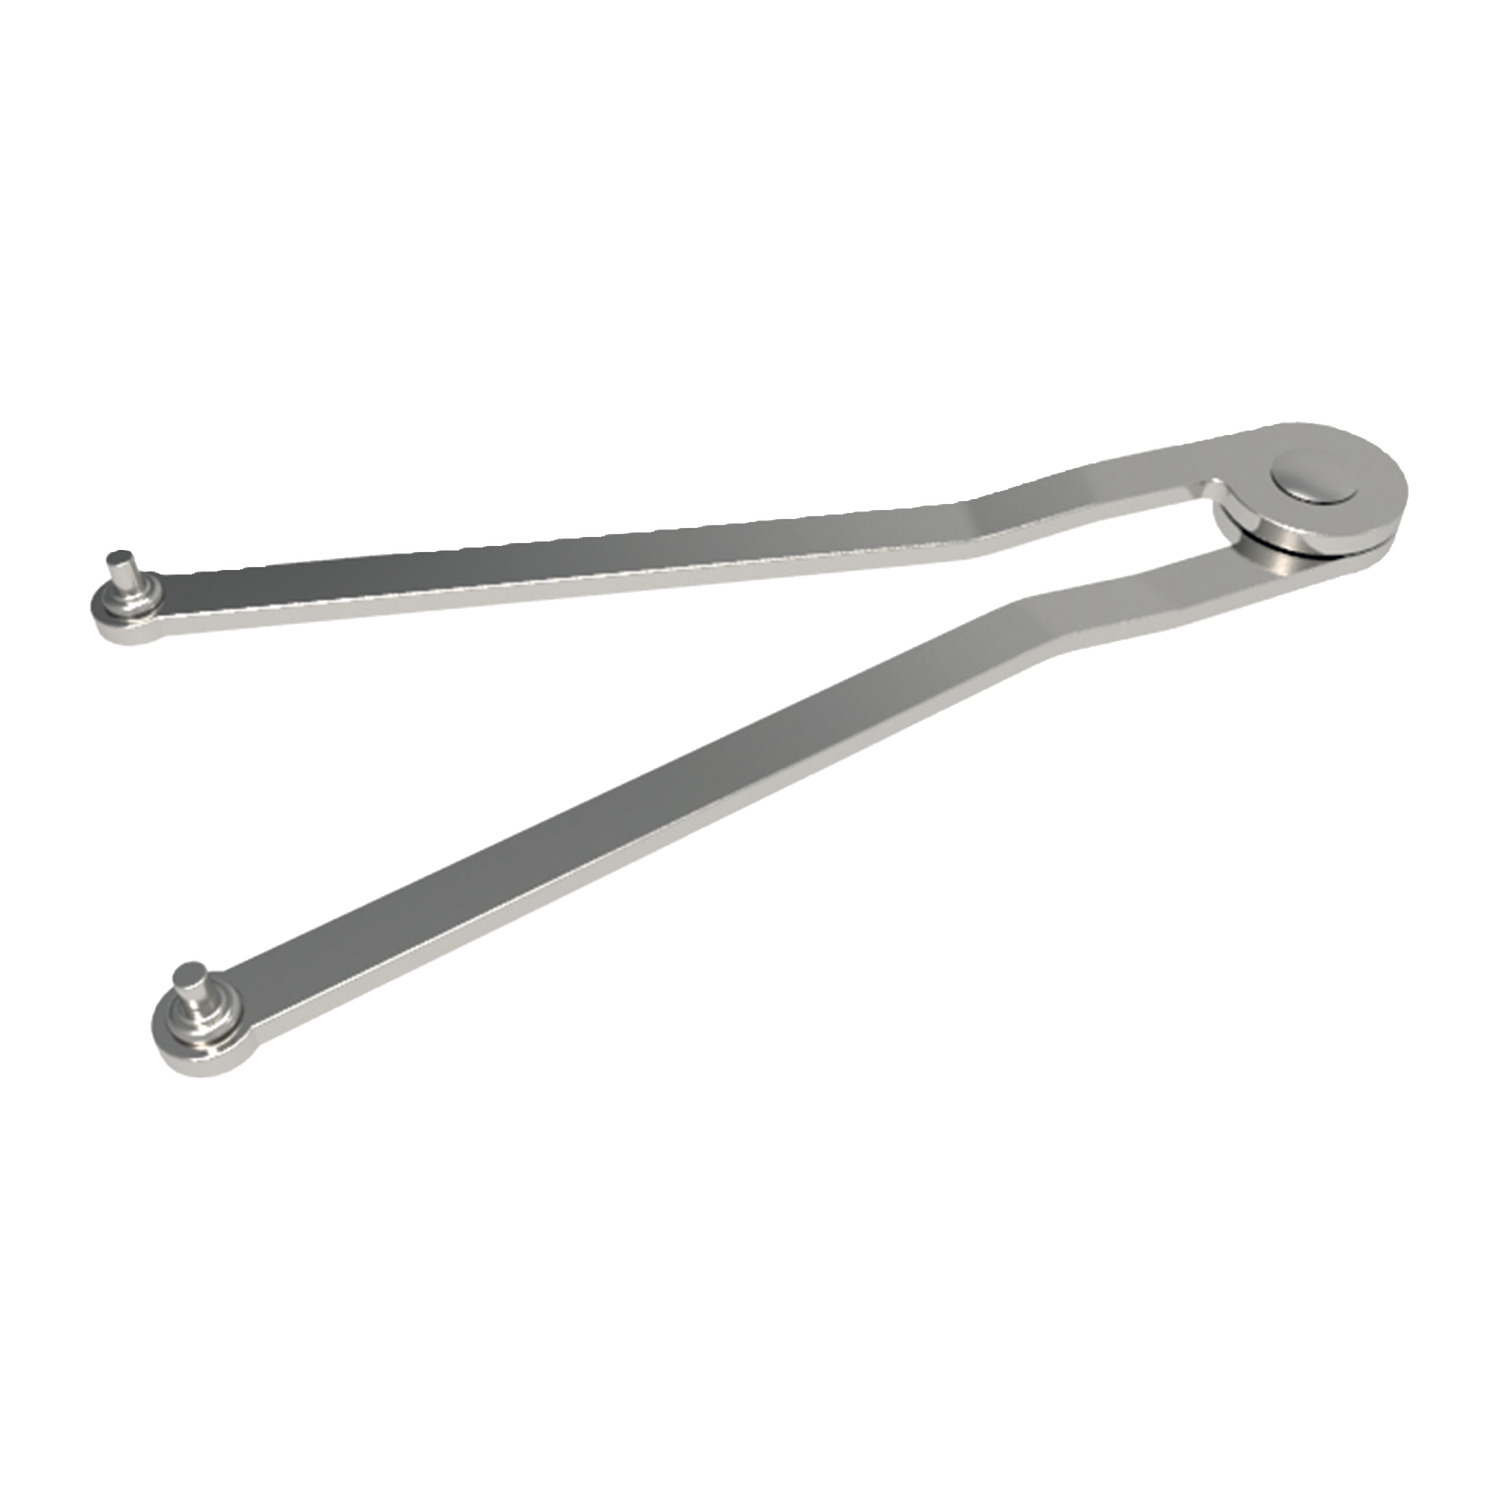 94000.2 Adjustable Pin Face Spanners